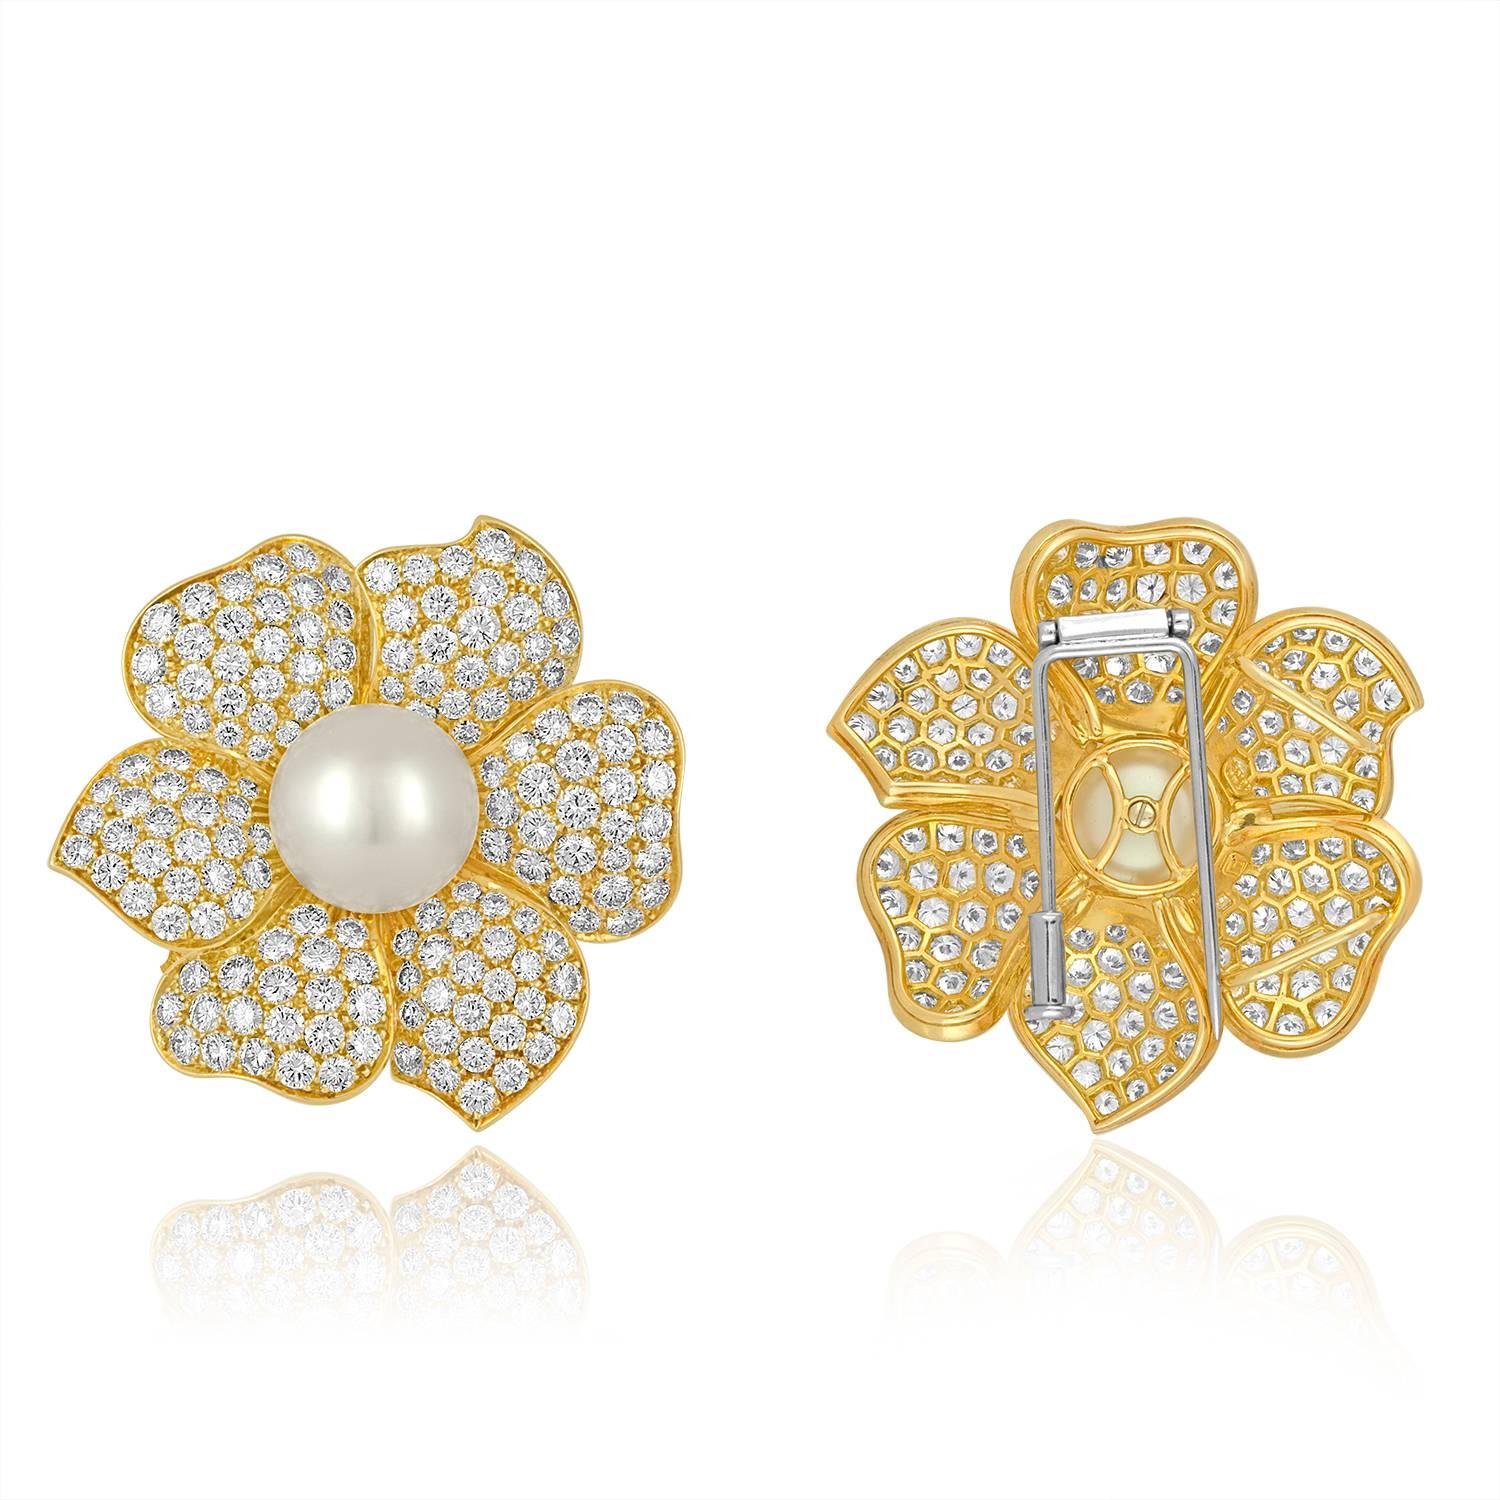 Stunning Flower Set
The set is 18K Yellow & White Gold
The earrings are 11.50 Carat In Diamonds E/F VVS
The earrings weigh 29.8 Grams
The earrings pearls are 12.2MM South Sea
The earrings are 1.25